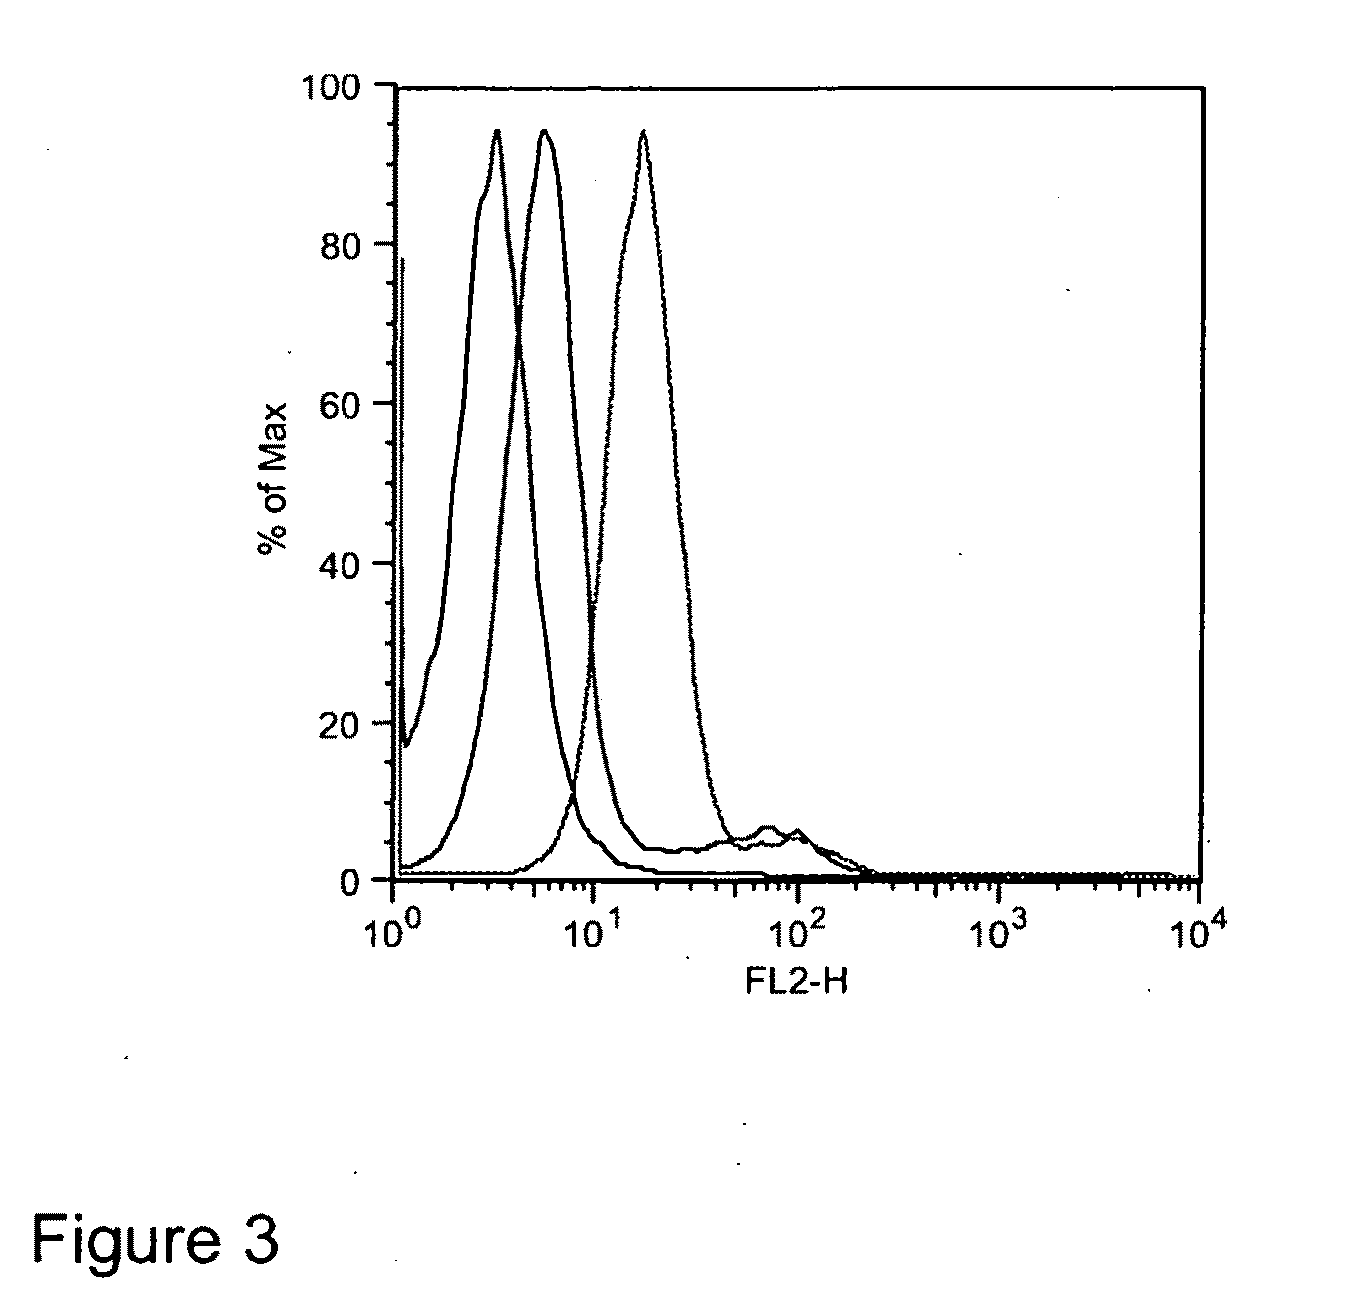 Fusion Protein Comprising an Fc Receptor Binding Polypeptide and an Antigenic Polypeptide for Mediating an Immune Response